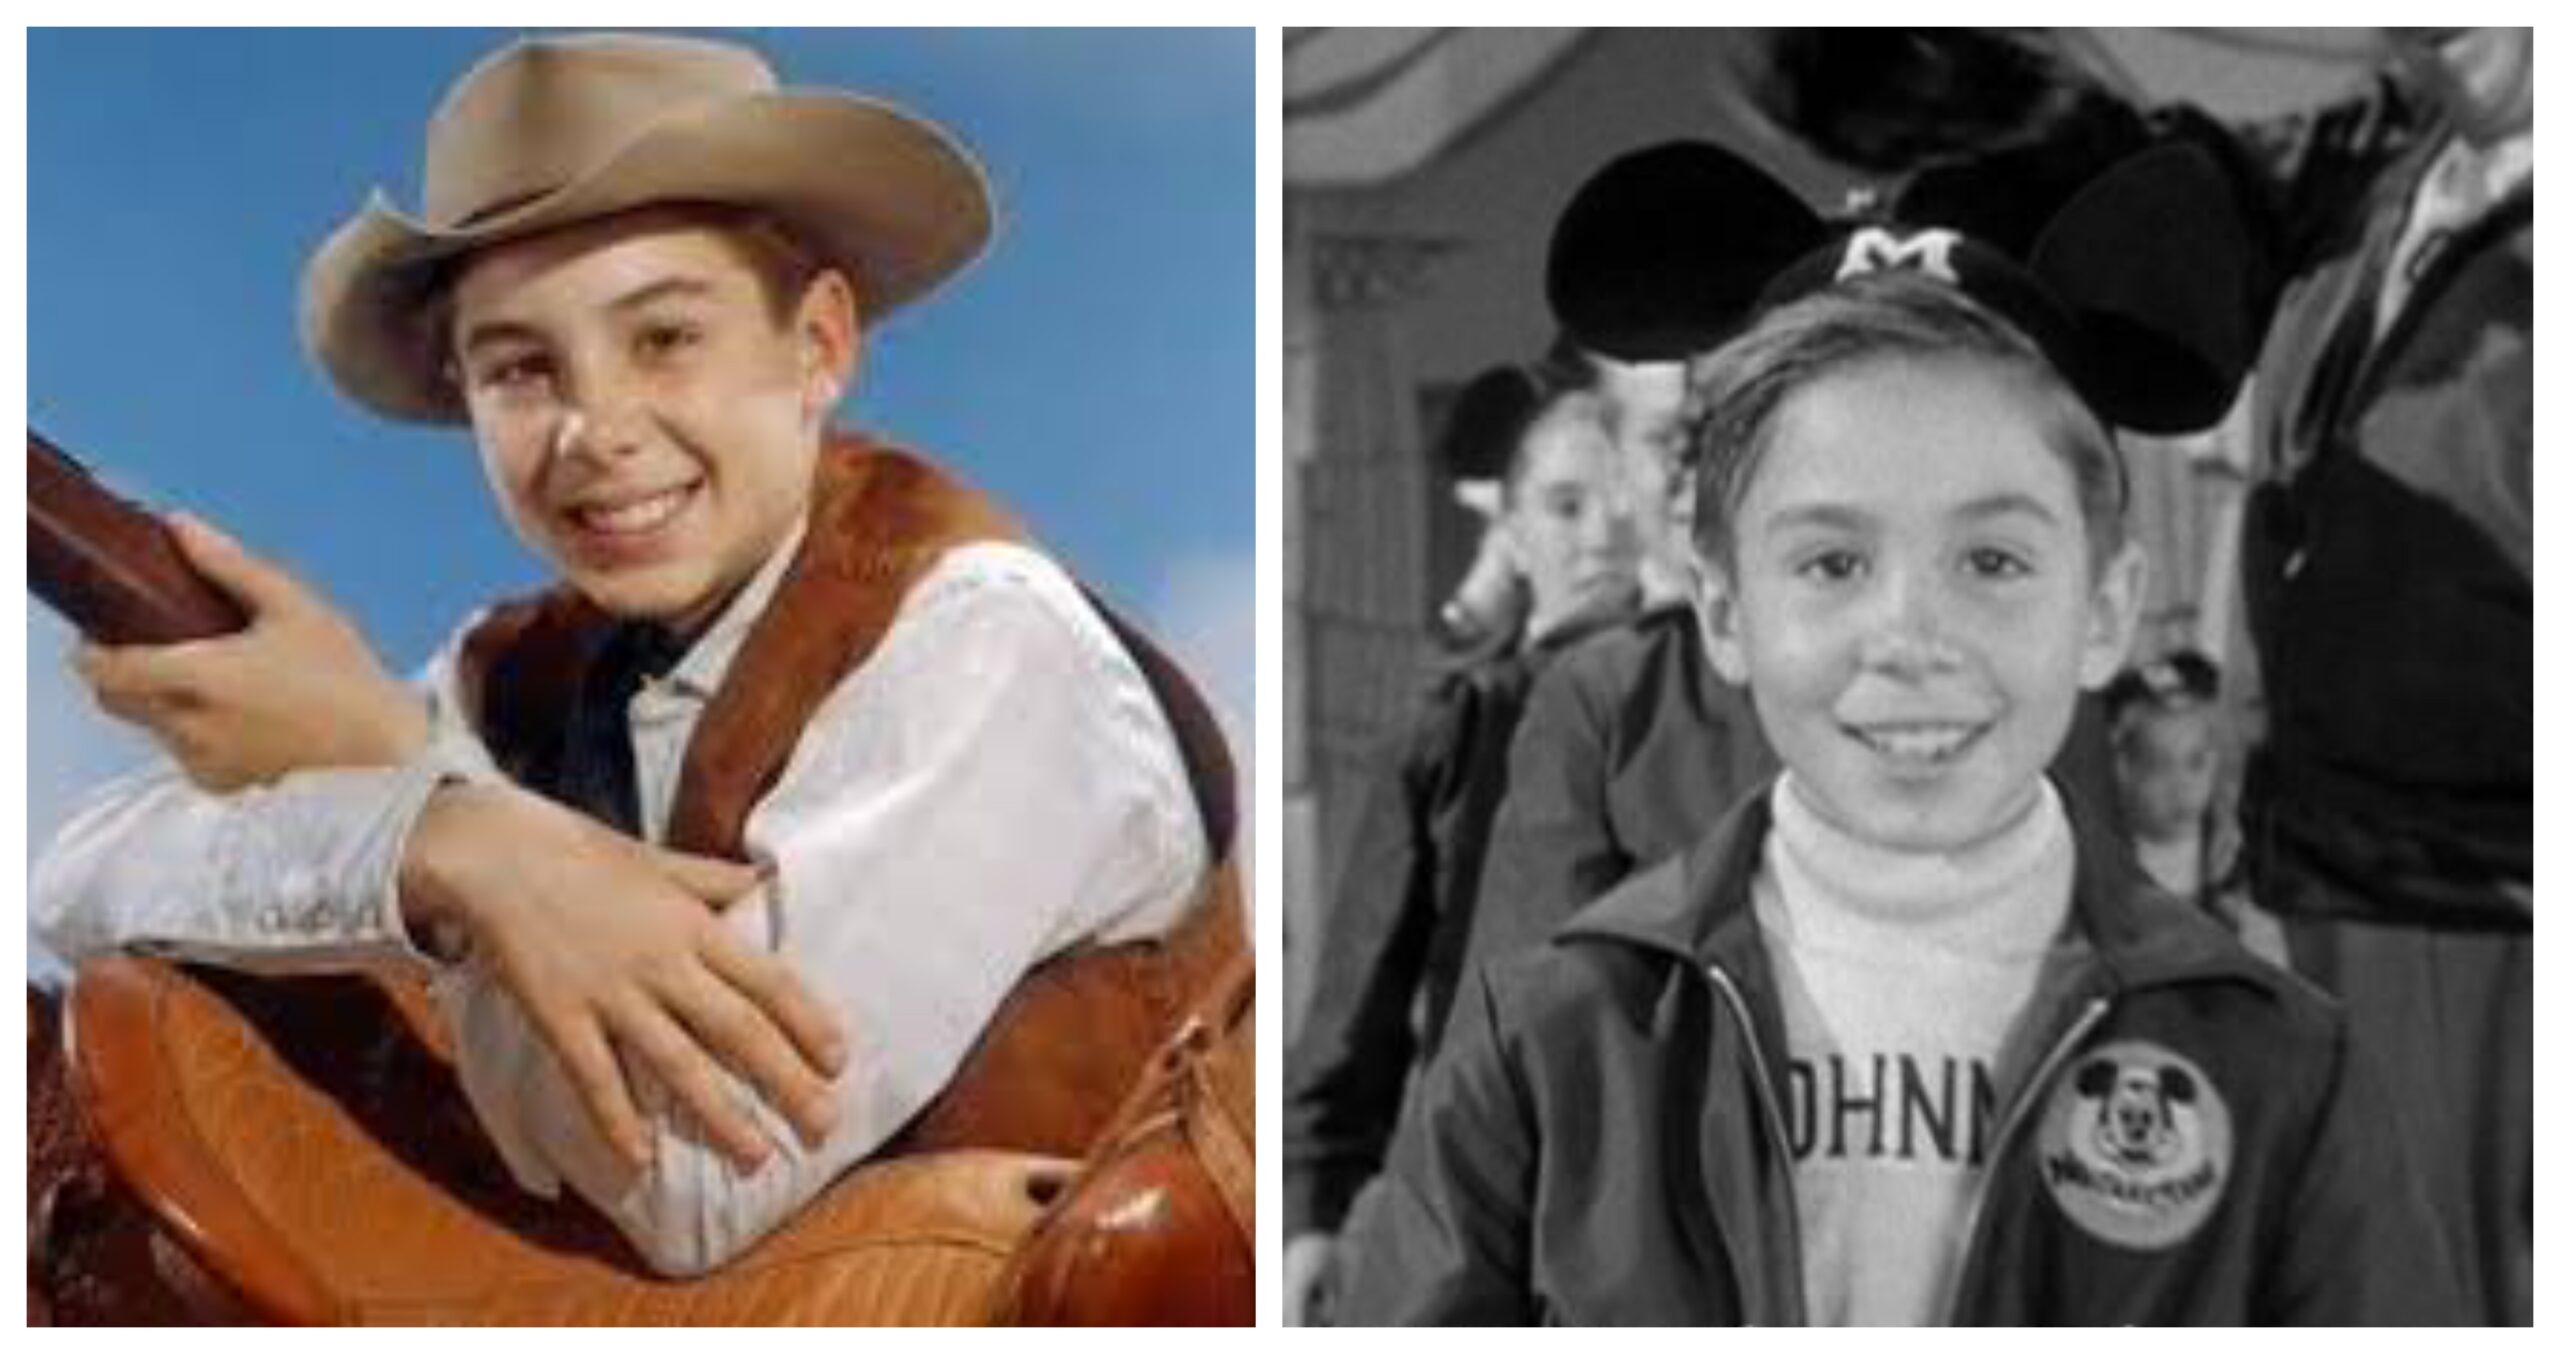 Johnny Crawford in The Rifleman (left) and The Mickey Mouse Club (right)